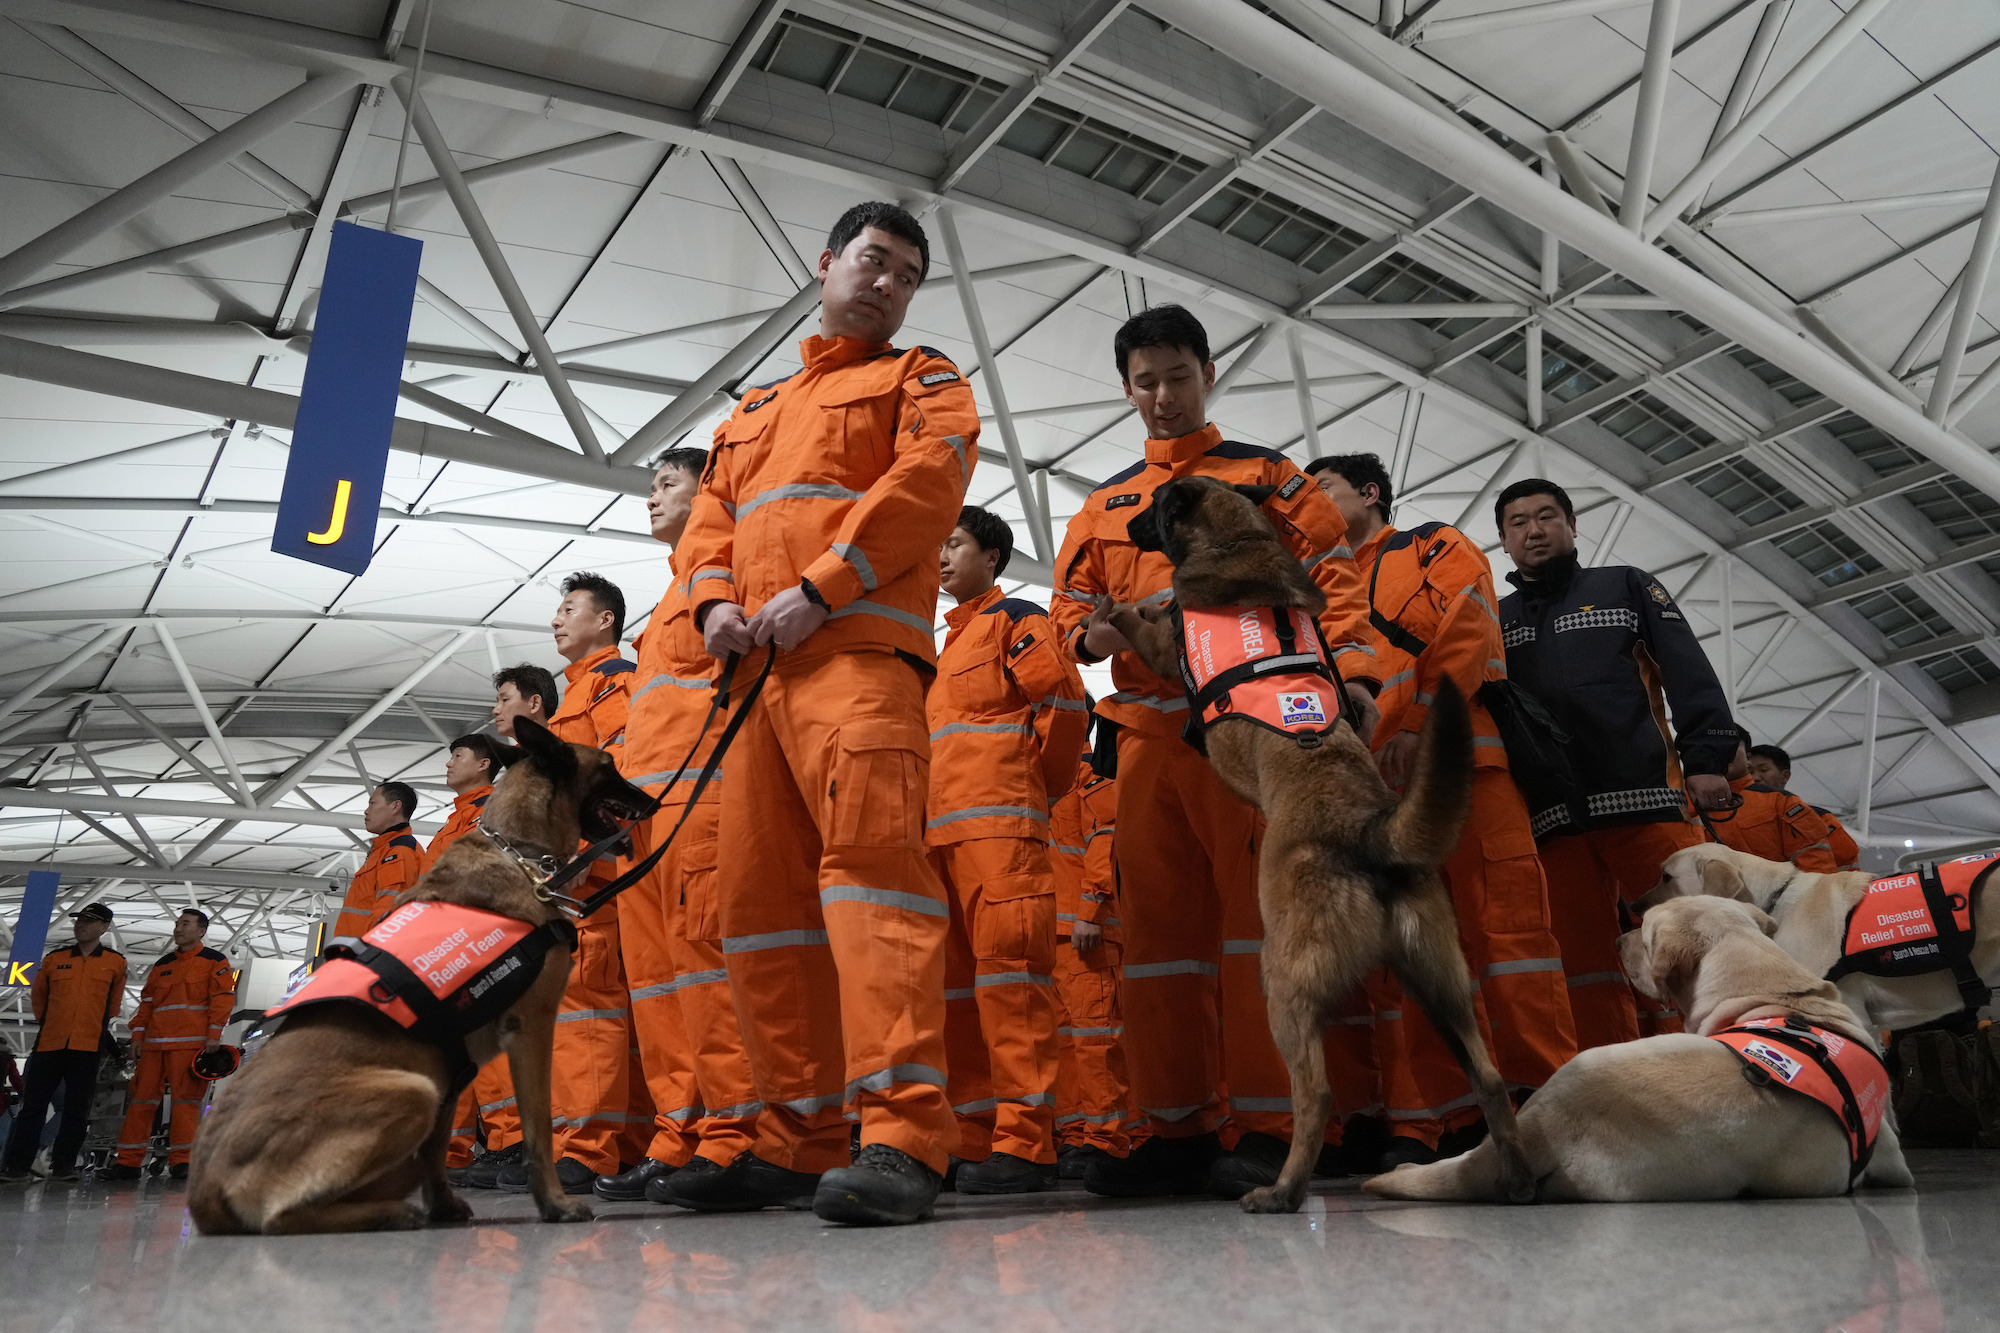 A South Korean rescue team prepares to board a plane for Turkey in Incheon, South Korea, on Tuesday.